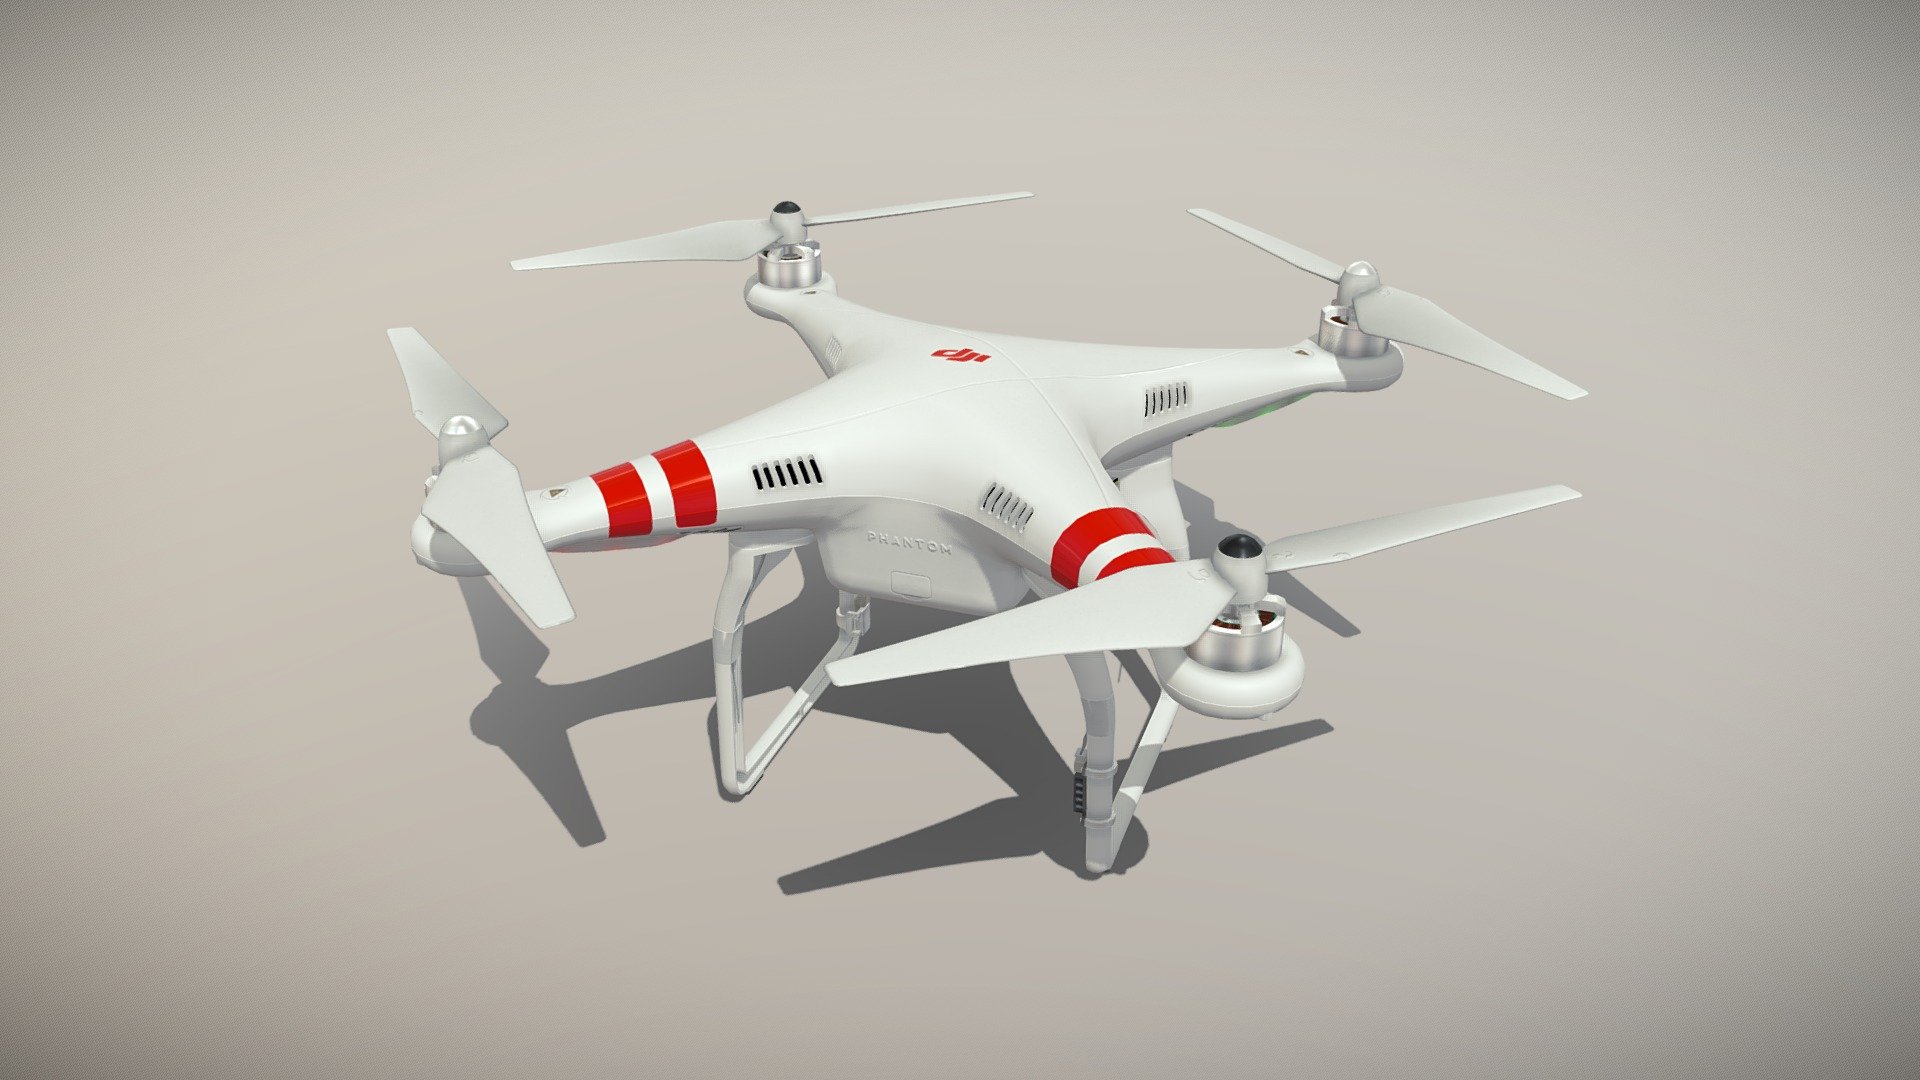 •   Let me present to you high-quality low-poly 3D model DJI Phantom 2 Quadcopter platform without camera.  Modeling was made with ortho-photos of real quadcopter that is why all details of design are recreated most authentically.

•    This model consists of a few meshes, it is low-polygonal and it has only one material.

•   The total of the main textures is 5. Resolution of all textures is 4096 pixels square aspect ratio in .png format. Also there is original texture file .PSD format in separate archive.

•   Polygon count of the model is – 11852.

•   The model has correct dimensions in real-world scale. All parts grouped and named correctly.

•   To use the model in other 3D programs there are scenes saved in formats .fbx, .obj, .DAE, .max (2010 version).

Note: If you see some artifacts on the textures, it means compression works in the Viewer. We recommend setting HD quality for textures. But anyway, original textures have no artifacts 3d model